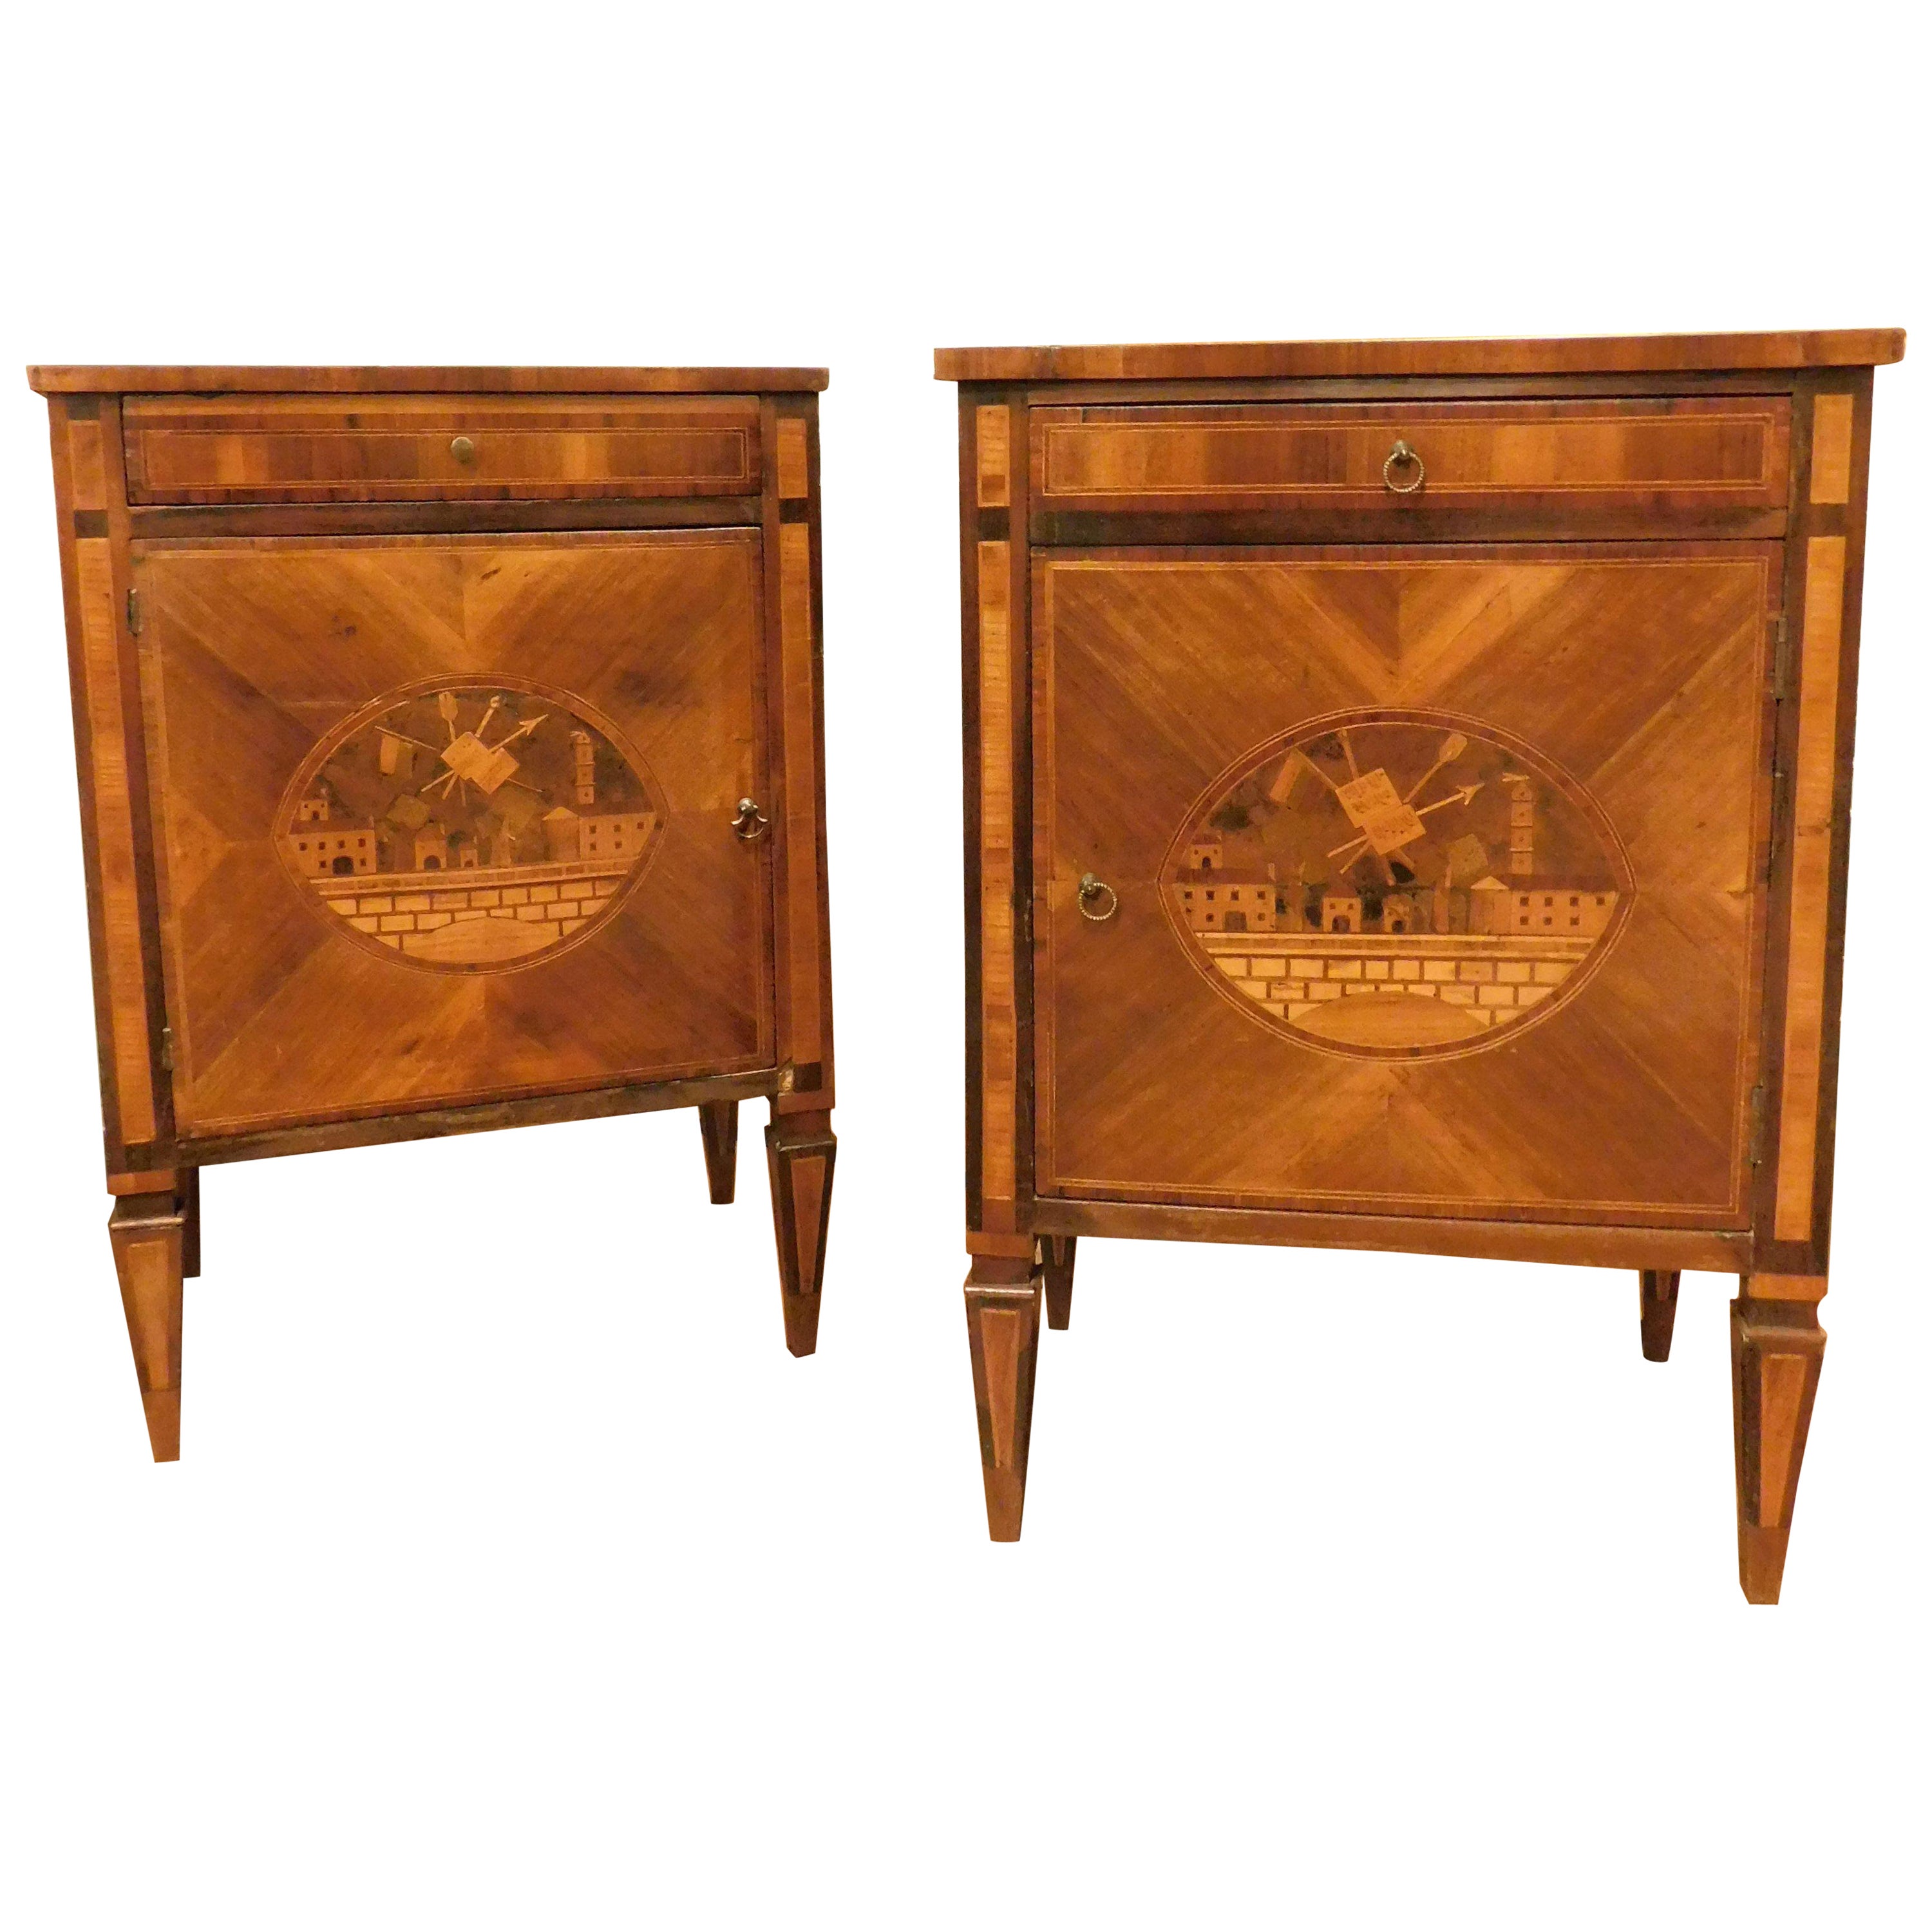 Pair of Walnut and Boxwood Veneered Bedside Tables, 18th Century, Italy For Sale